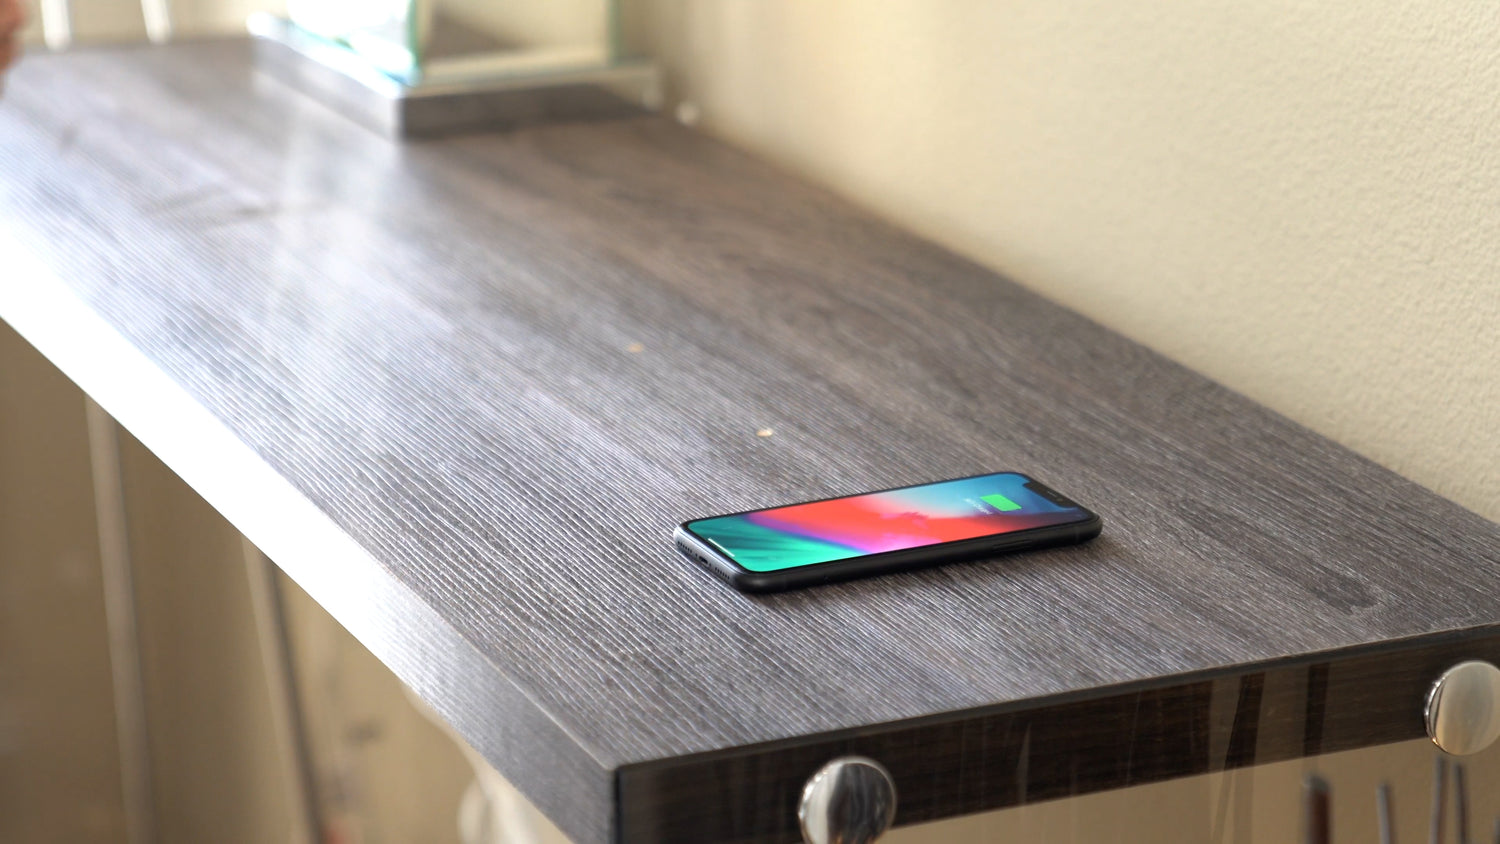 Why You Should Invest in an Under Counter Wireless Charger